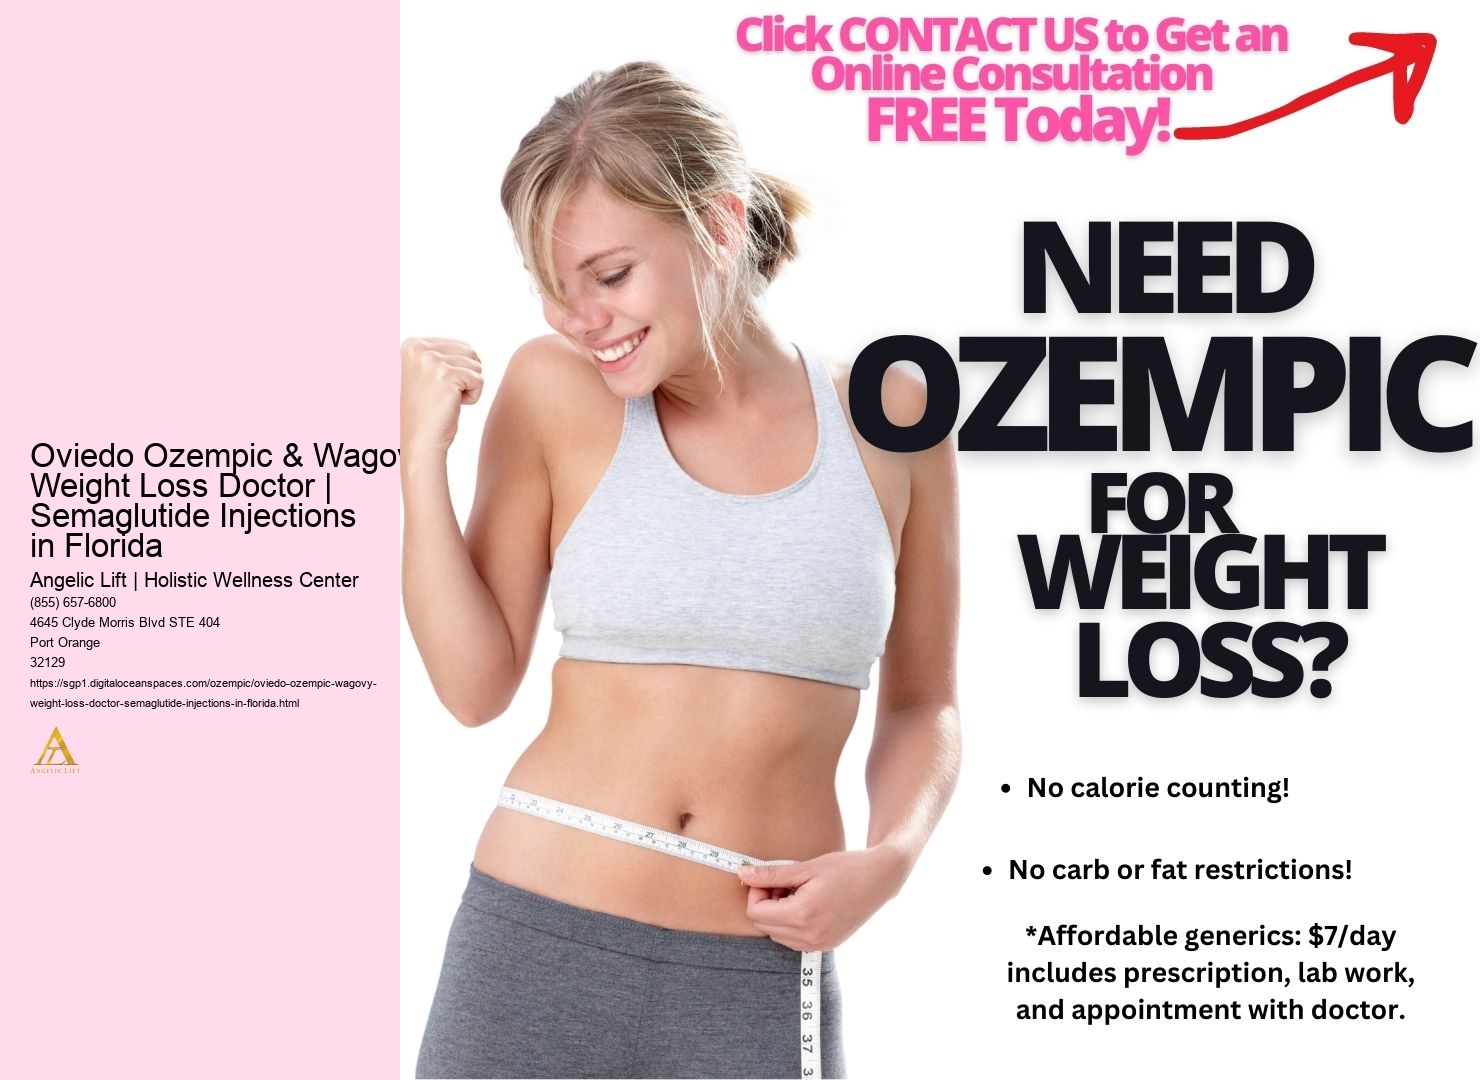 Oviedo Ozempic & Wagovy Weight Loss Doctor | Semaglutide Injections in Florida